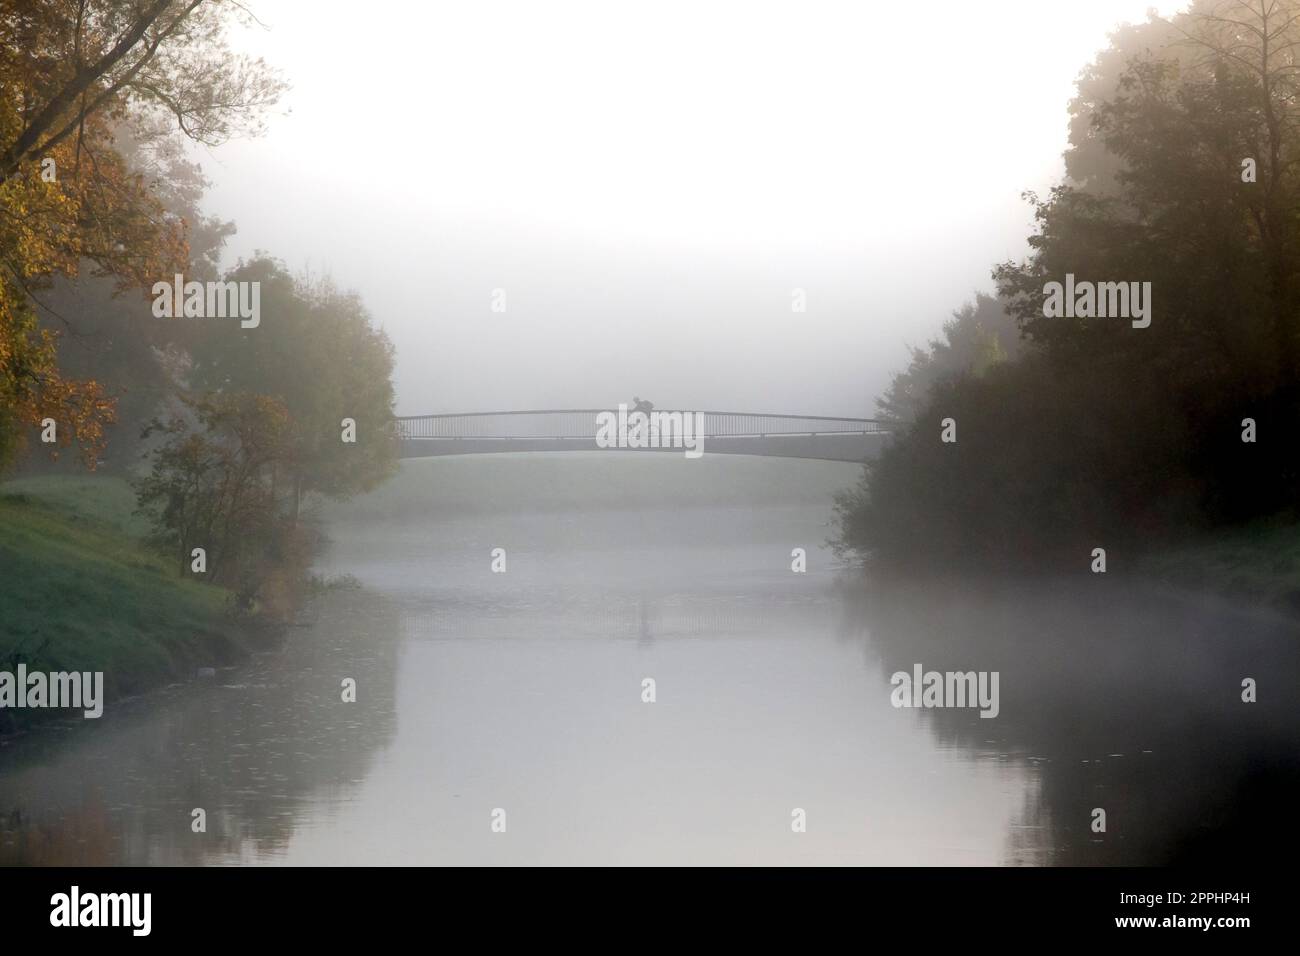 Lonely cyclist in morning or evening fog on bridge over small river Stock Photo